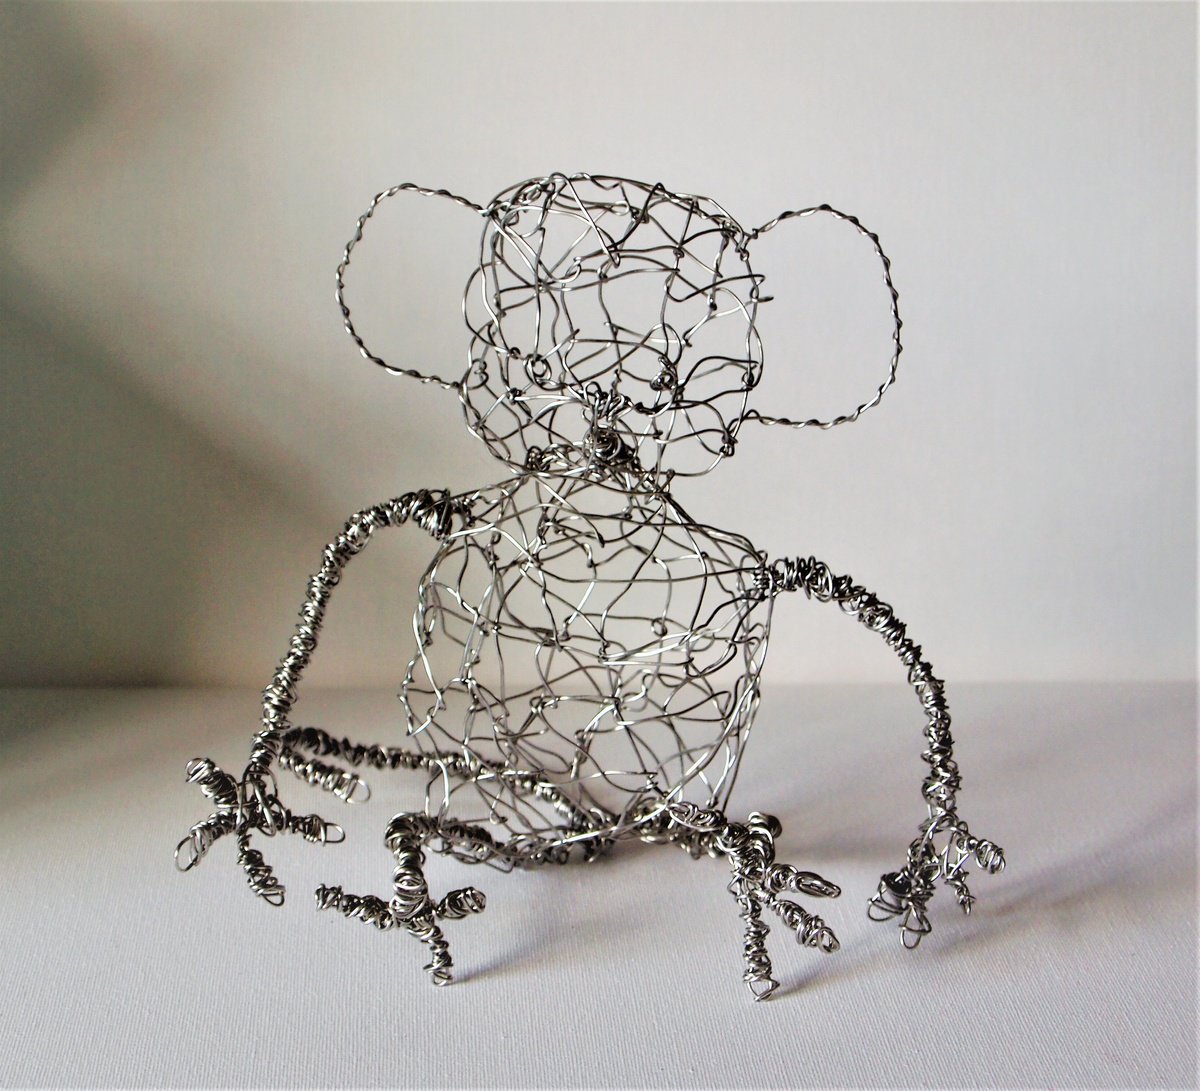 Silver wire Mike Monkey sculpture by Steph Morgan